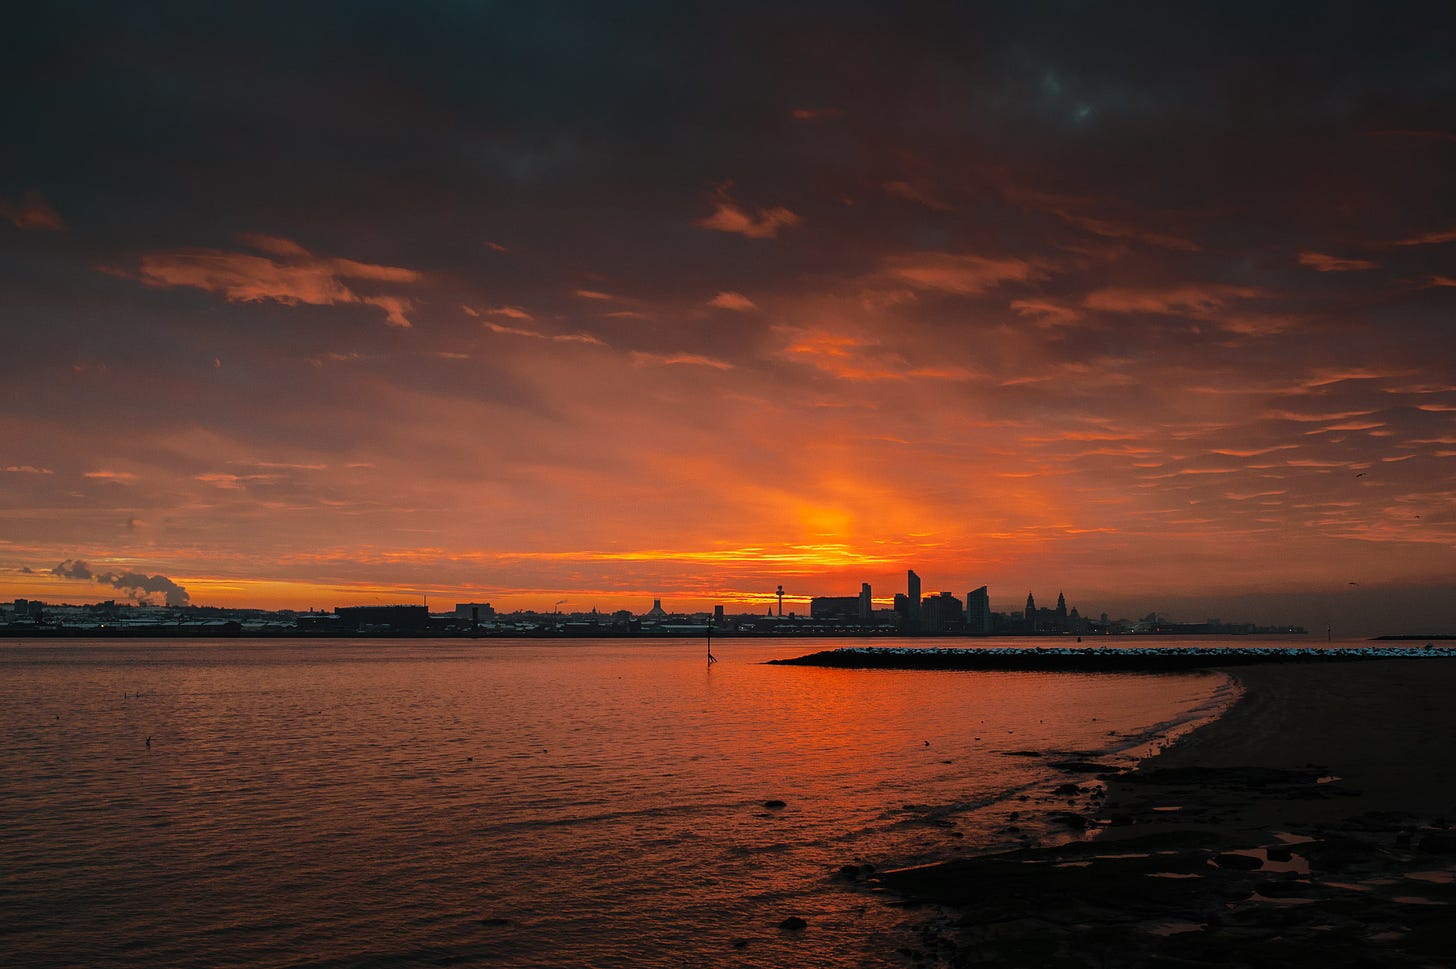 As the sunrises the sky is filled with deep red colours and clouds. Across the River Mersey there are buildings and homes covered with snow.